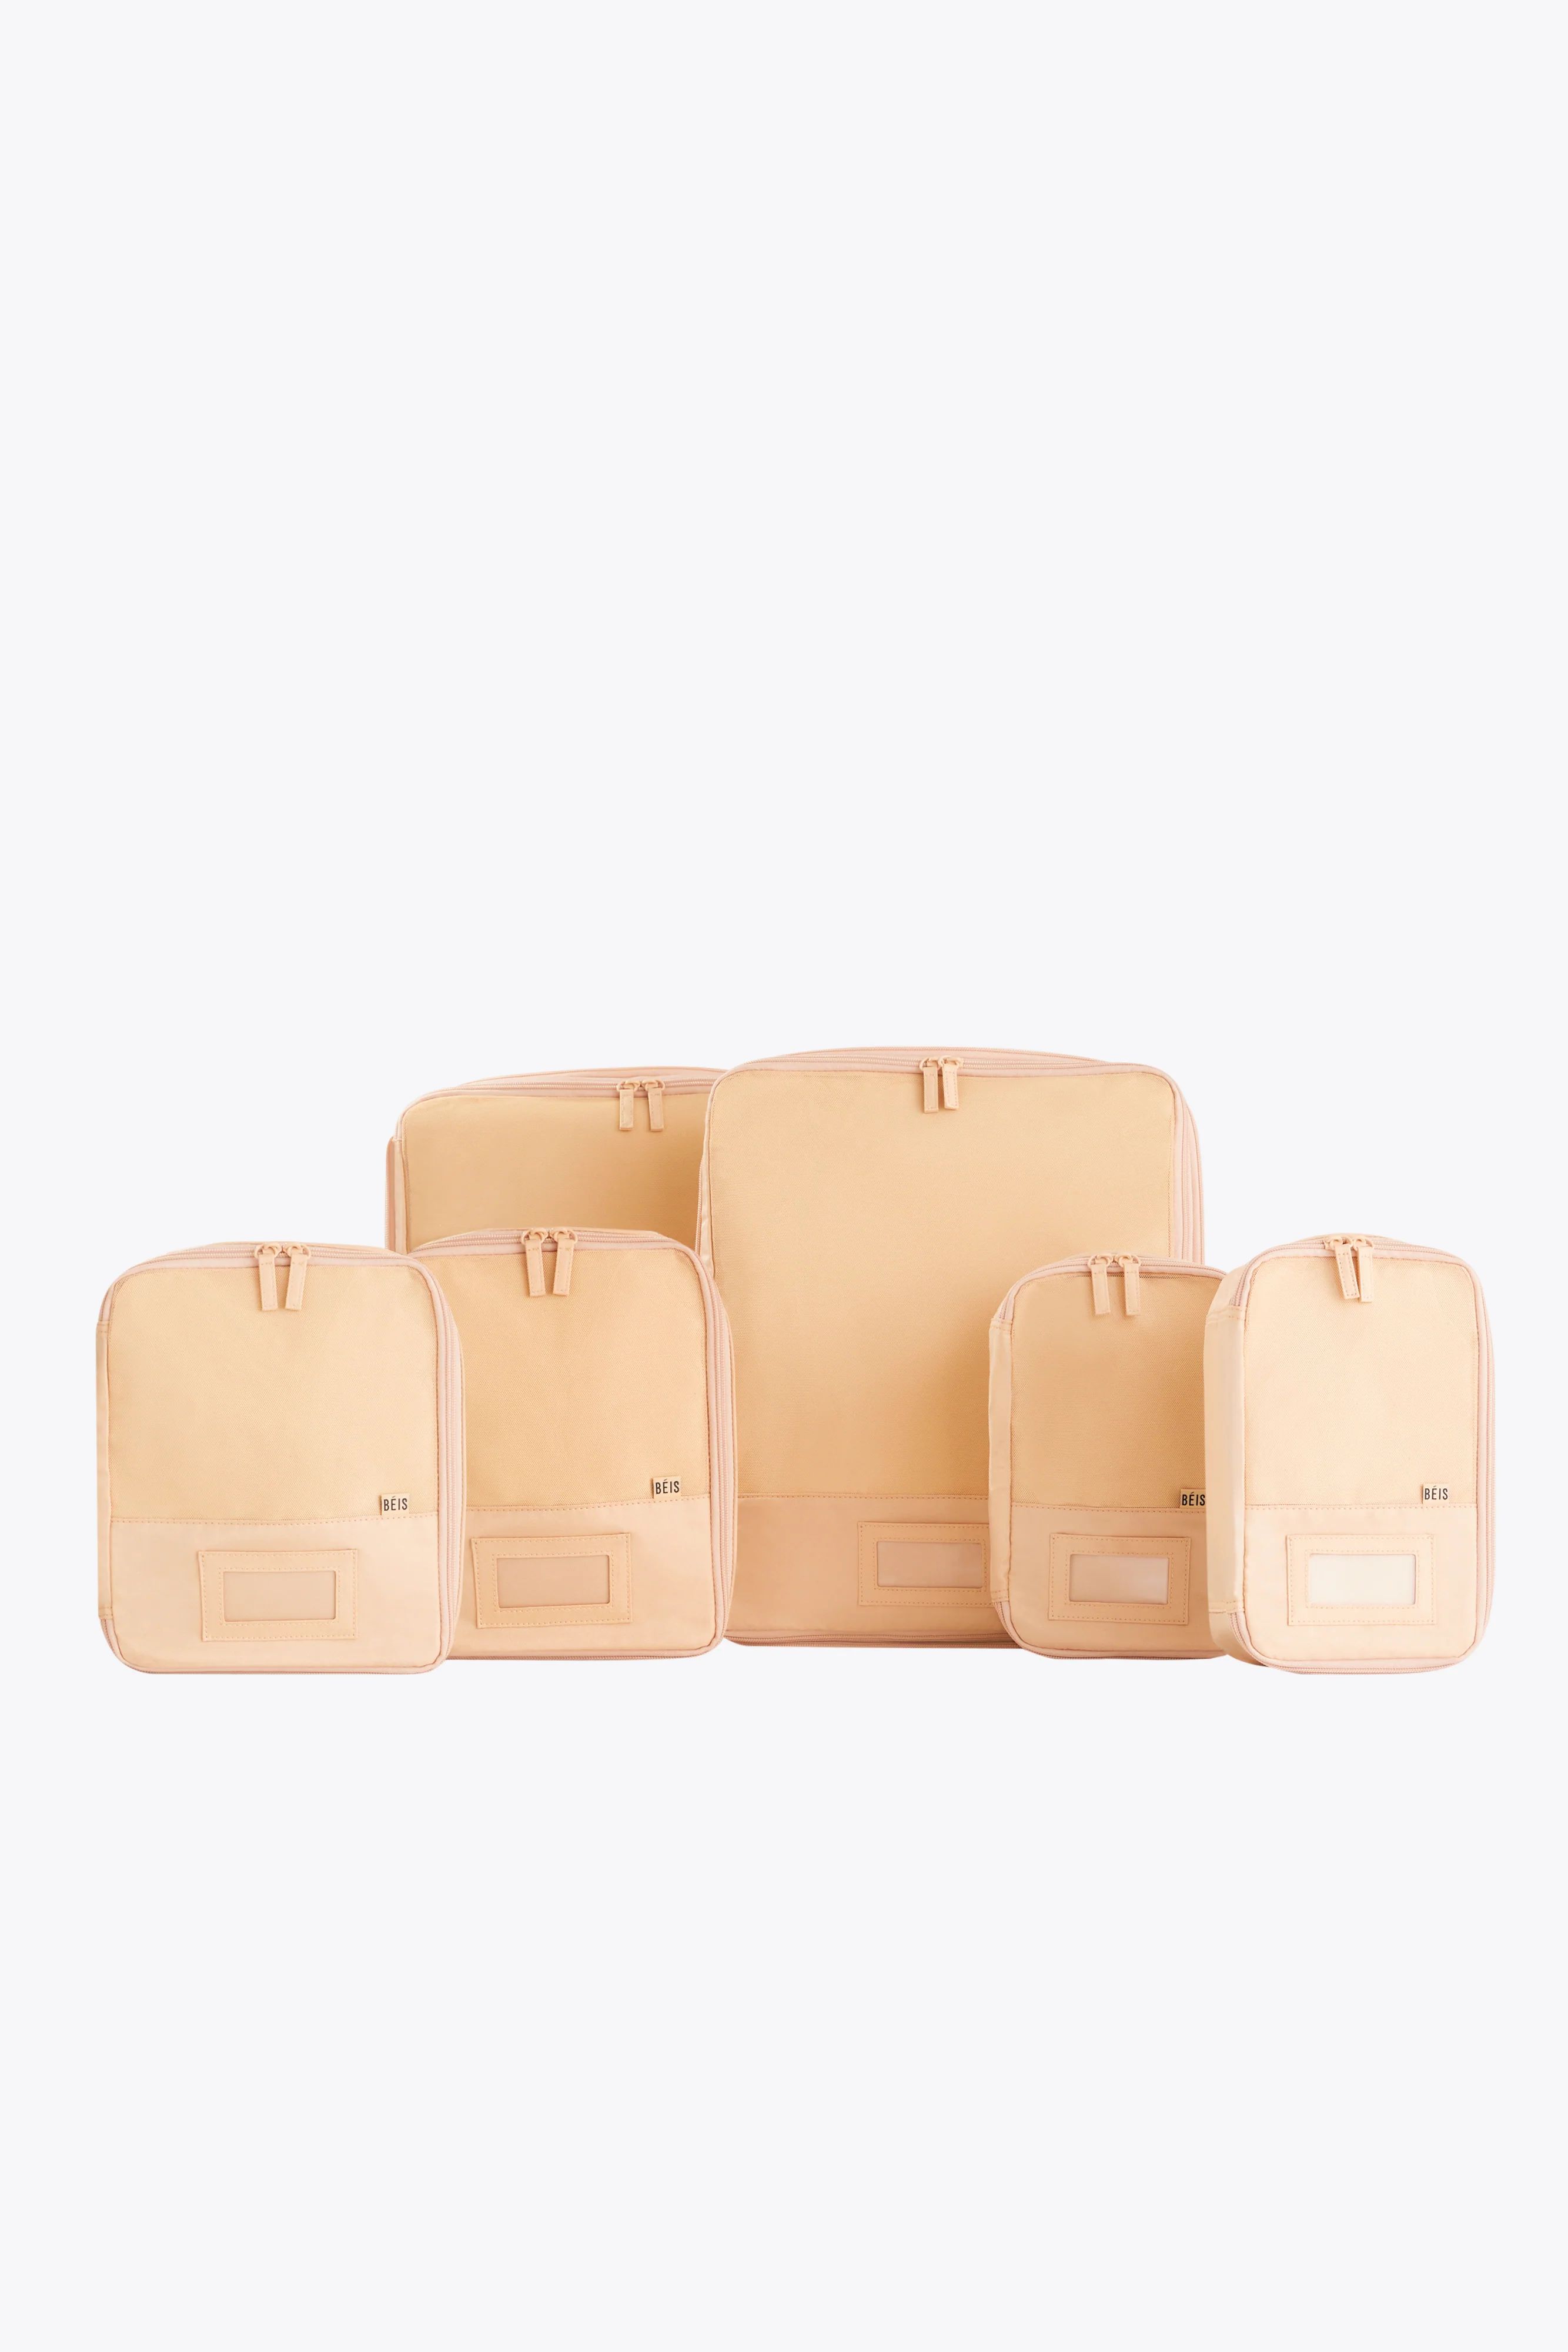 Béis 'The Compression Packing Cubes 6pc' in Beige - 6 Piece Set Of Packing Compression Bags For ... | BÉIS Travel